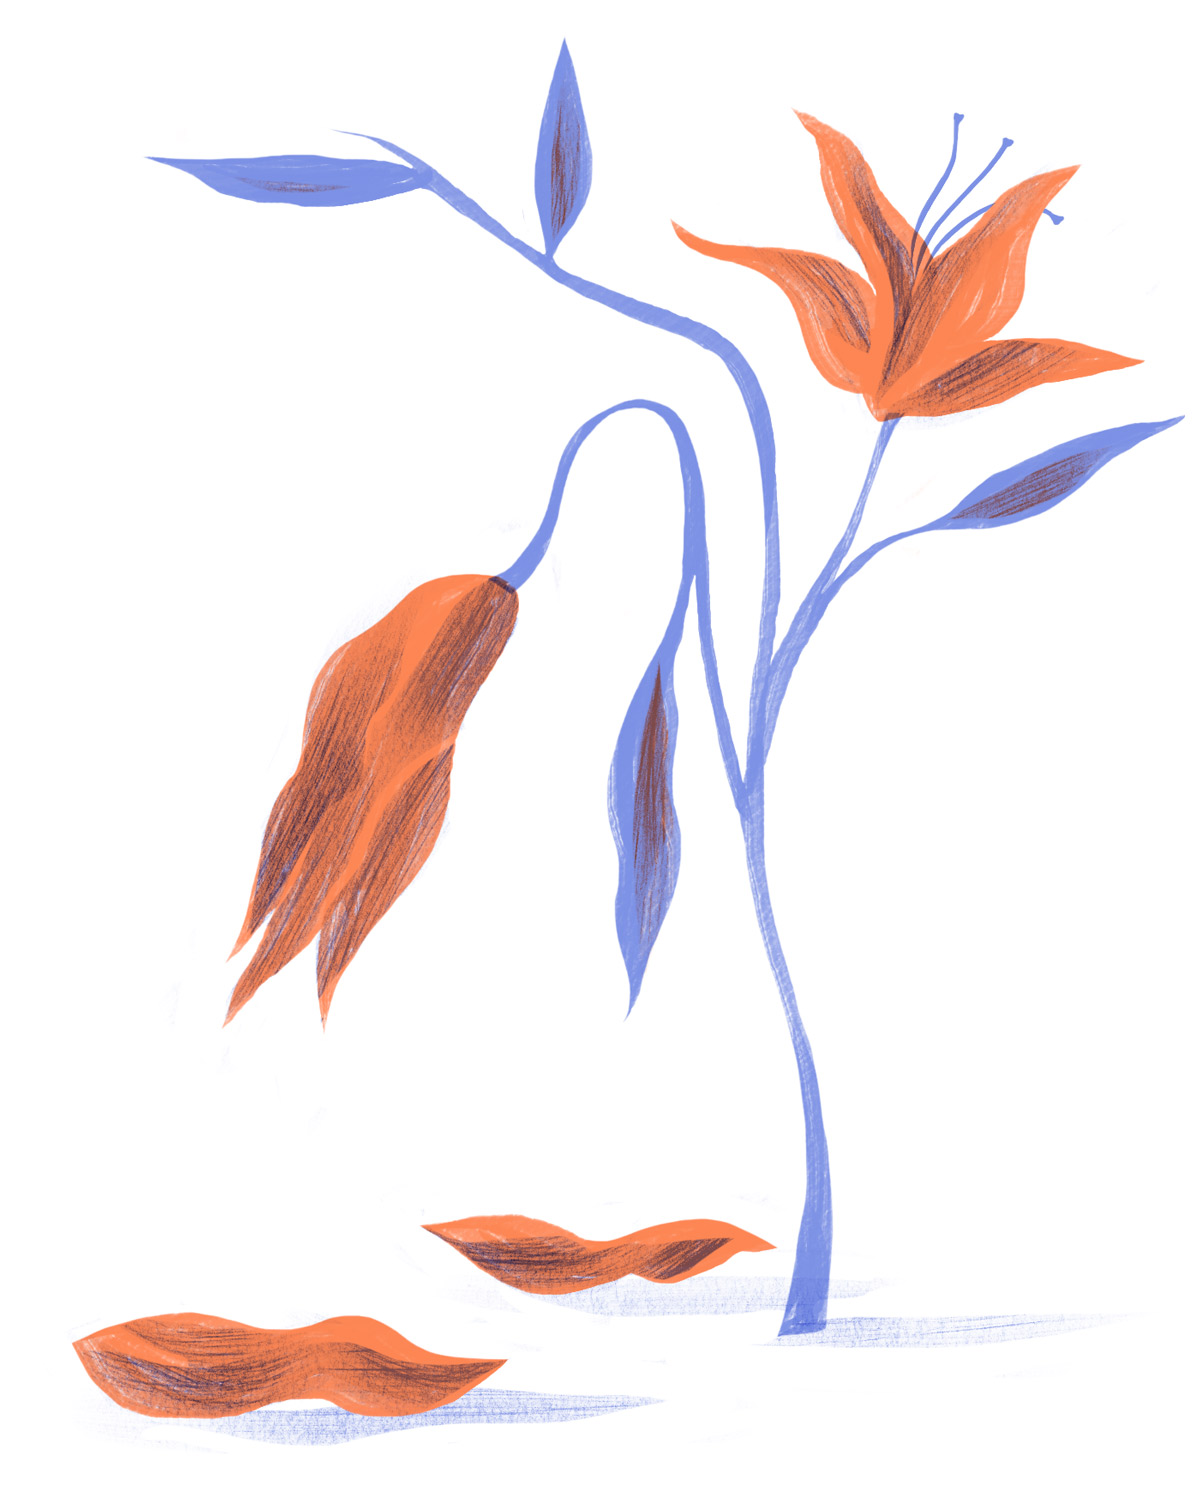 Orange and purple illustration of a flower with fallen petals